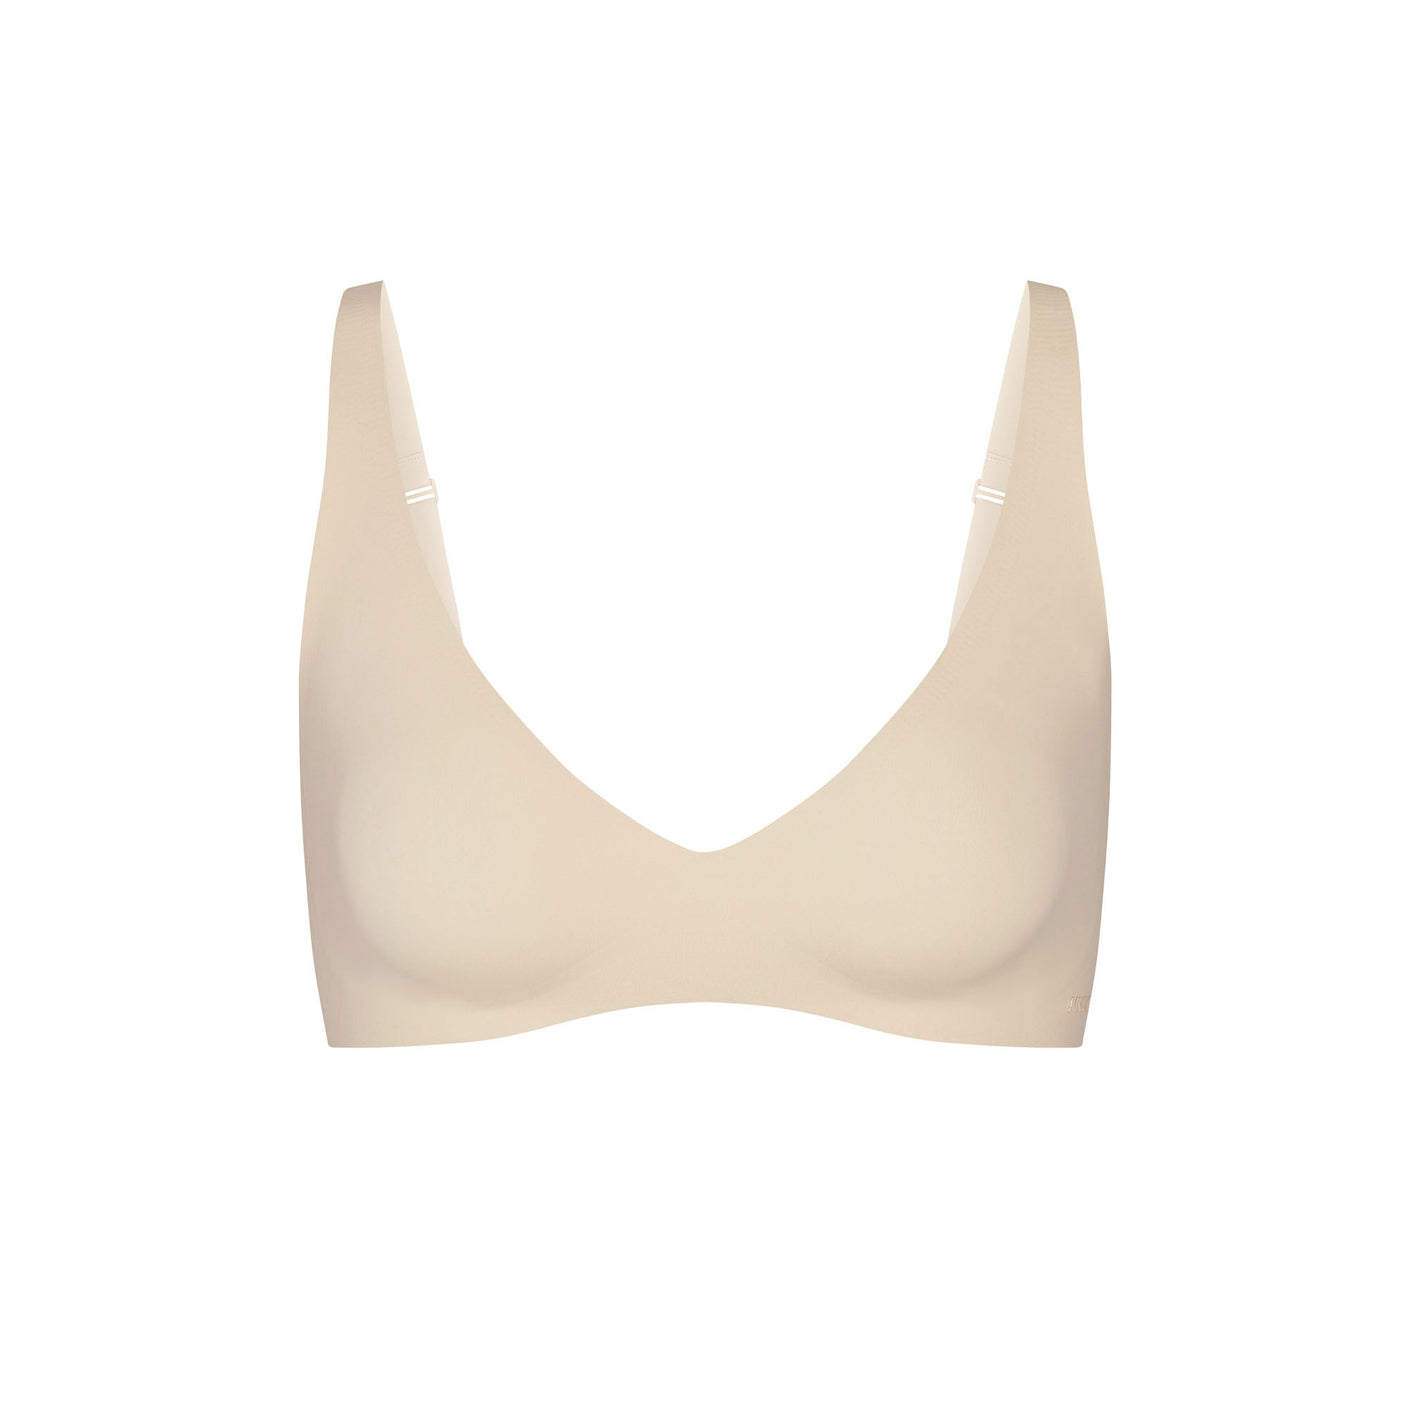 SKIMS BRA FITS EVERYBODY T-SHIRT BRA NWT UMBER Size 34 F / DDD - $45 New  With Tags - From Cutie